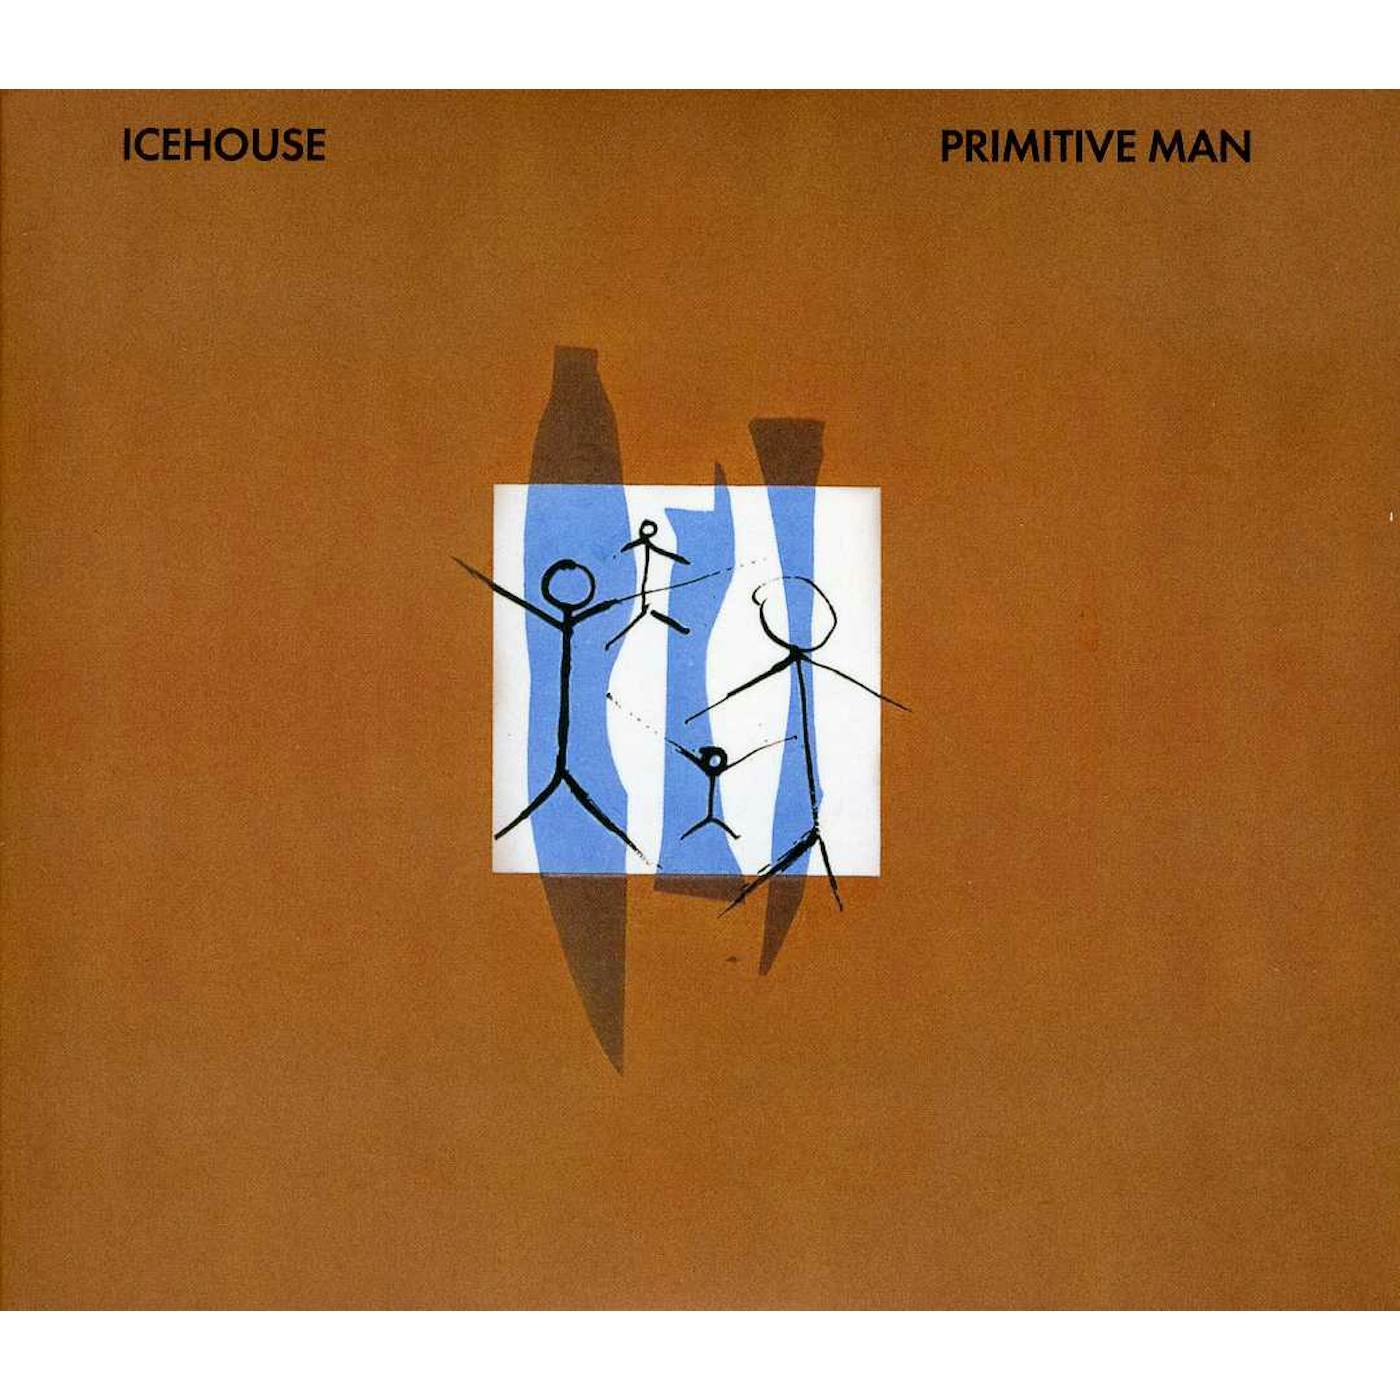 ICEHOUSE PRIMITIVE MAN (30TH ANNIVERSARY) CD